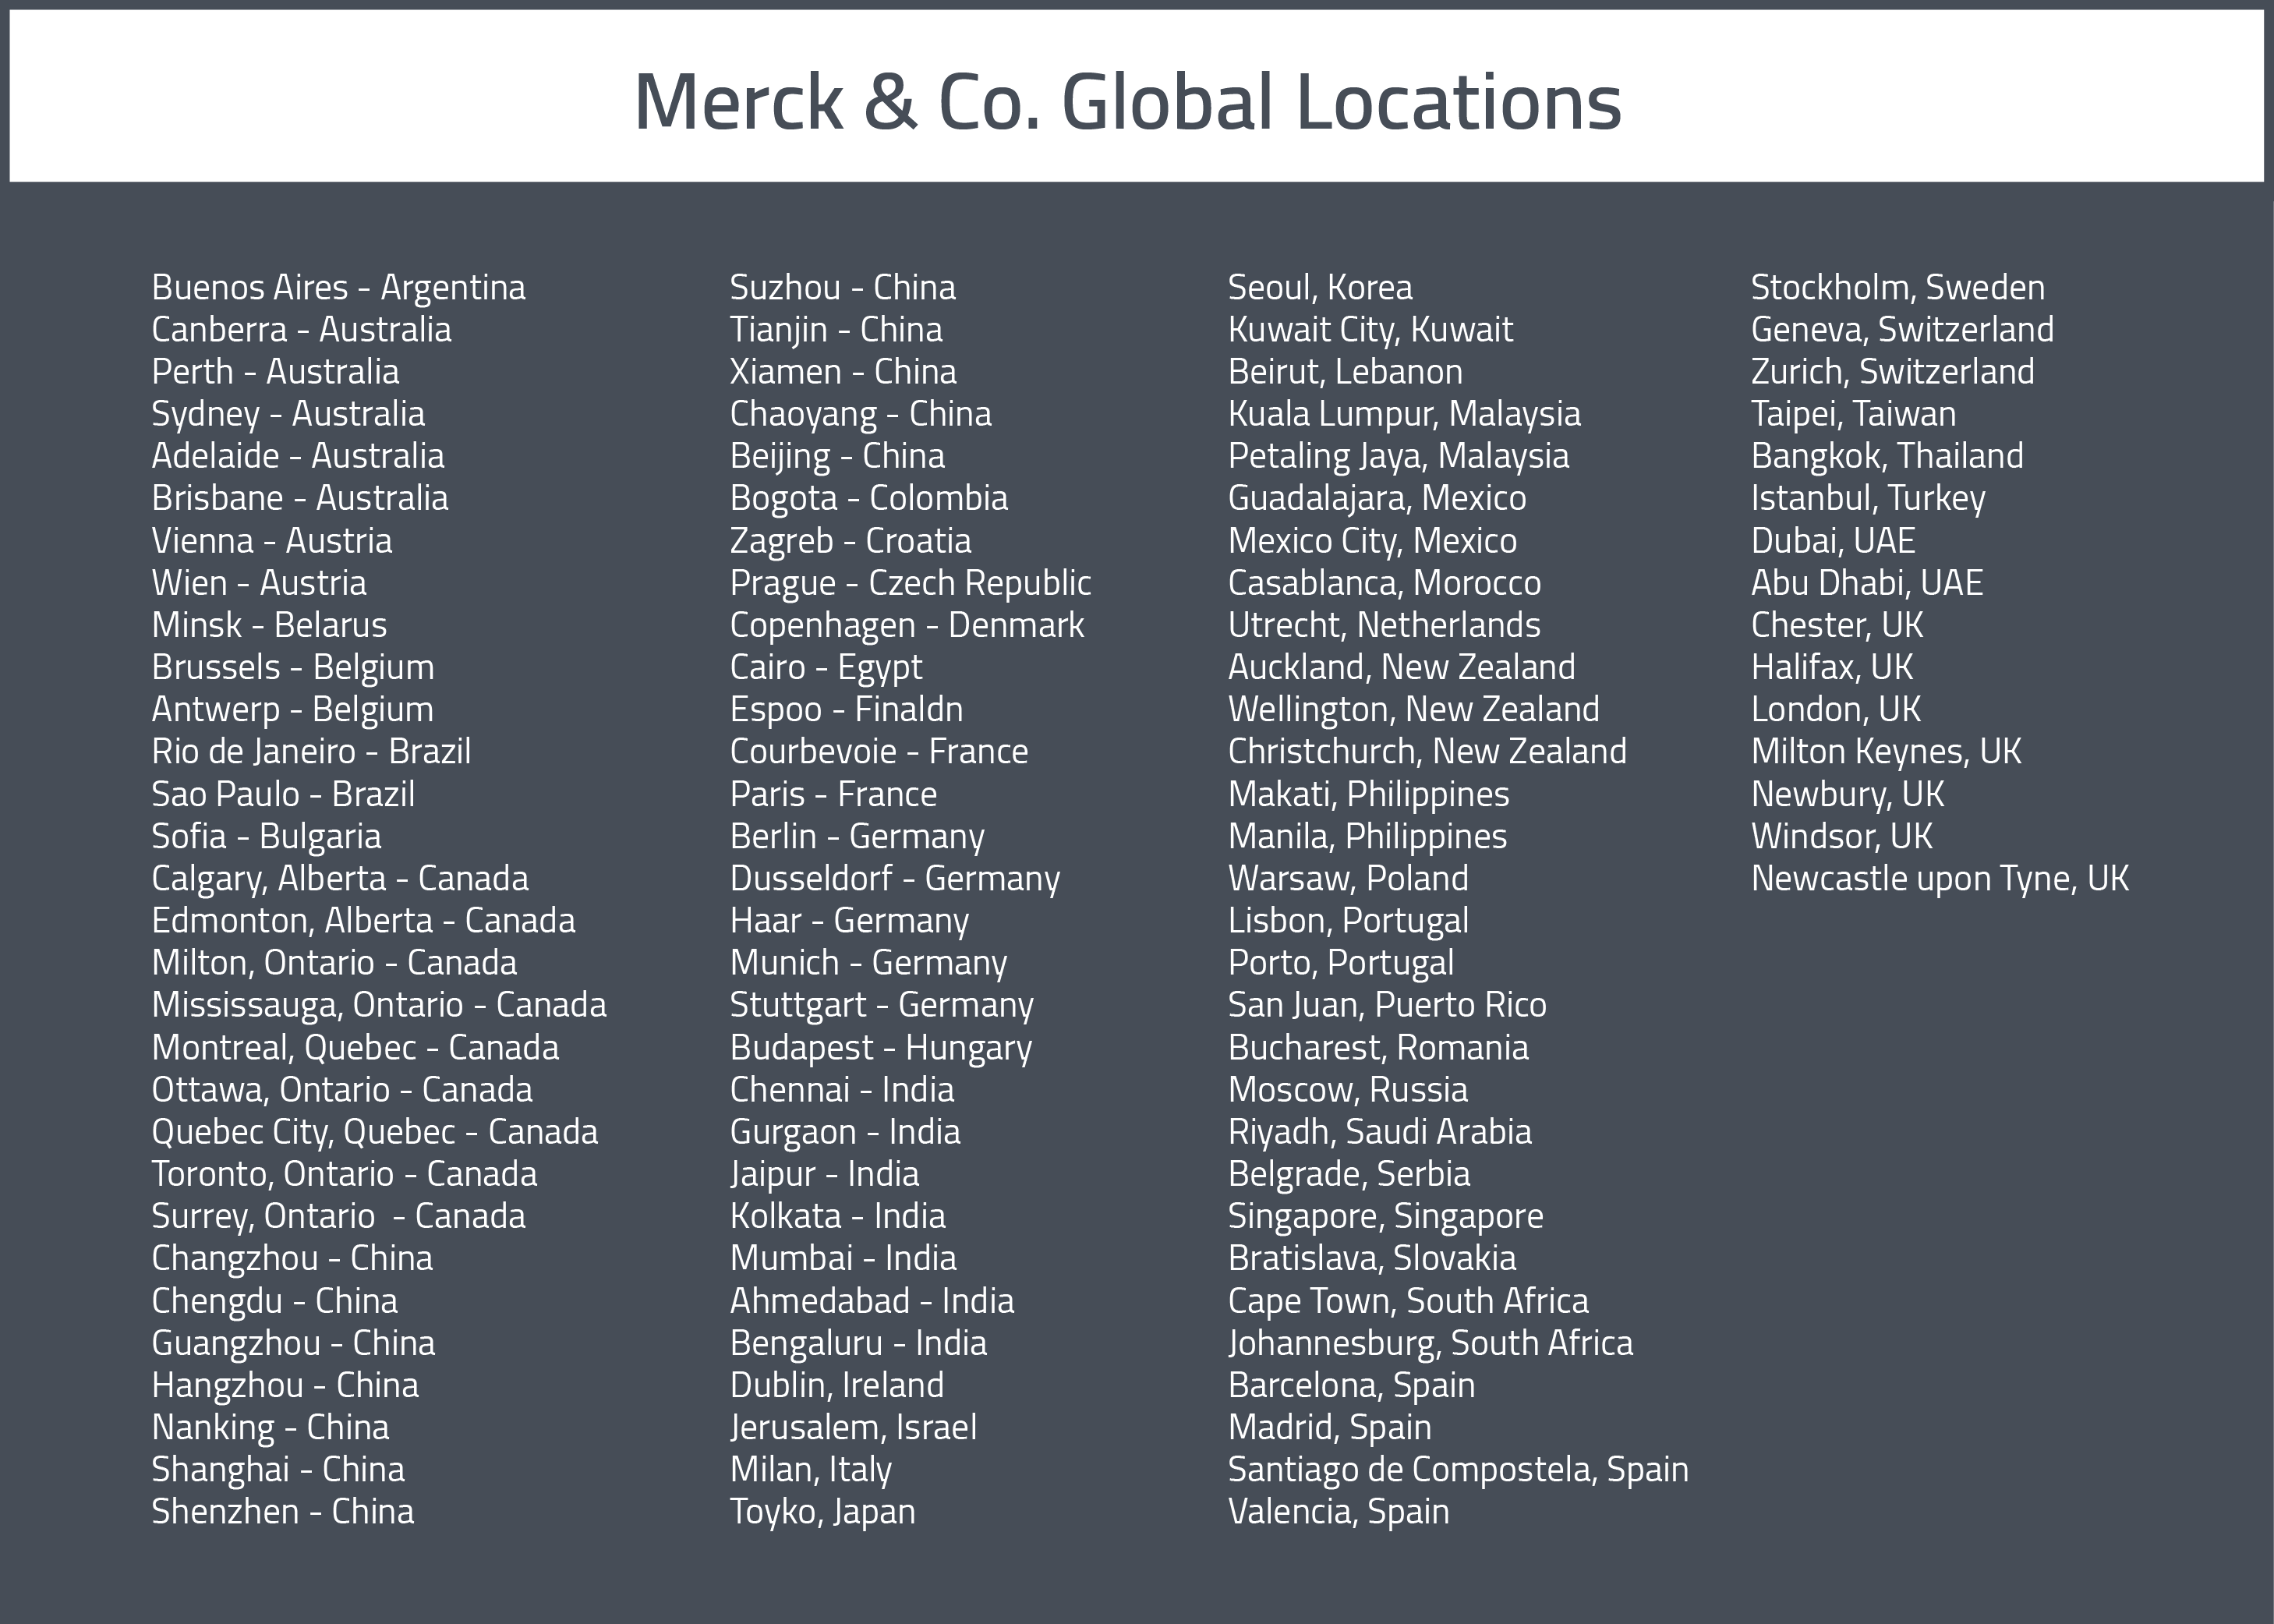 A map of Merck & Co's Global Drug Development and Manufacturing locations 2